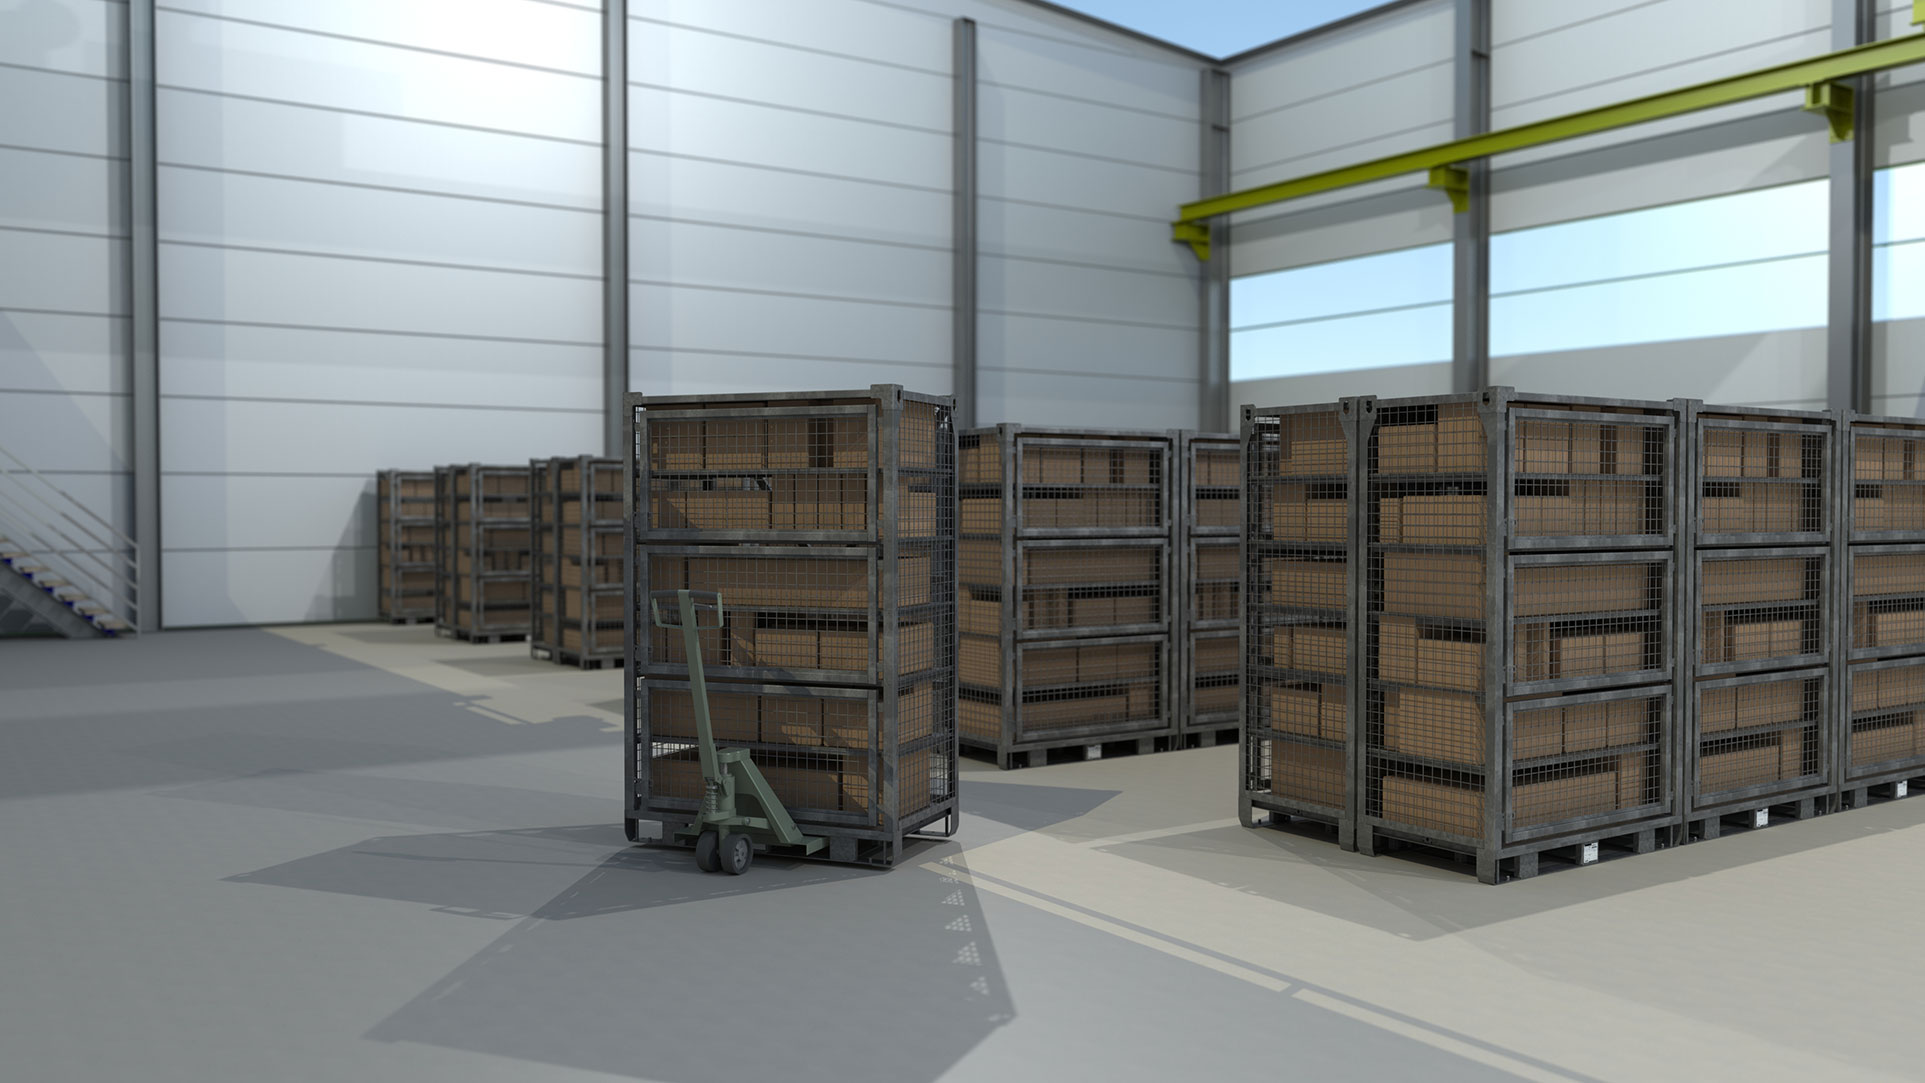 Deployment Lockers Sorted into Aisles in Warehouse